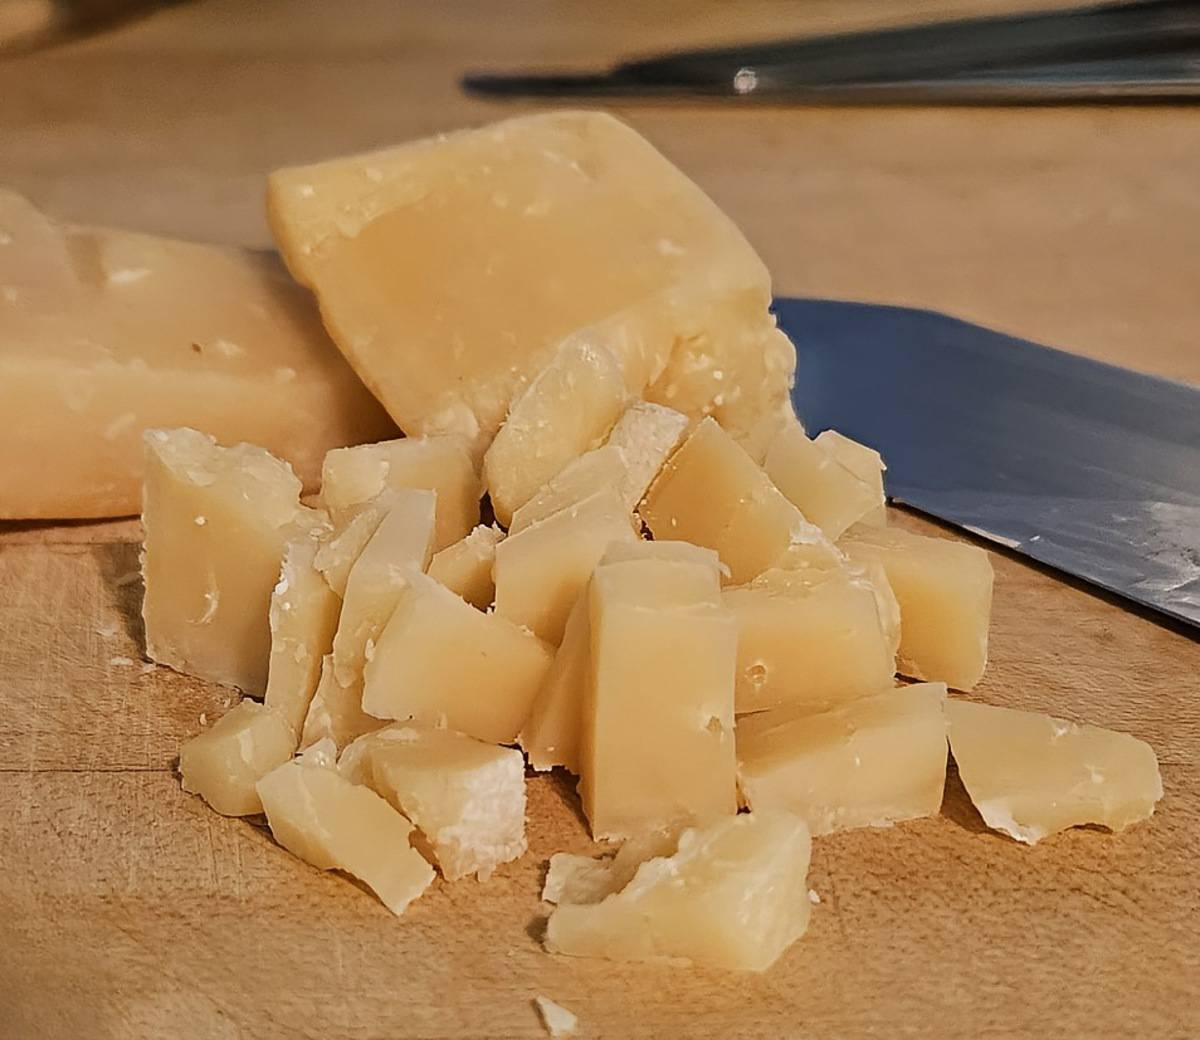 roughly chopped parmigiana Reggiano on a wooden cutting board with a knife